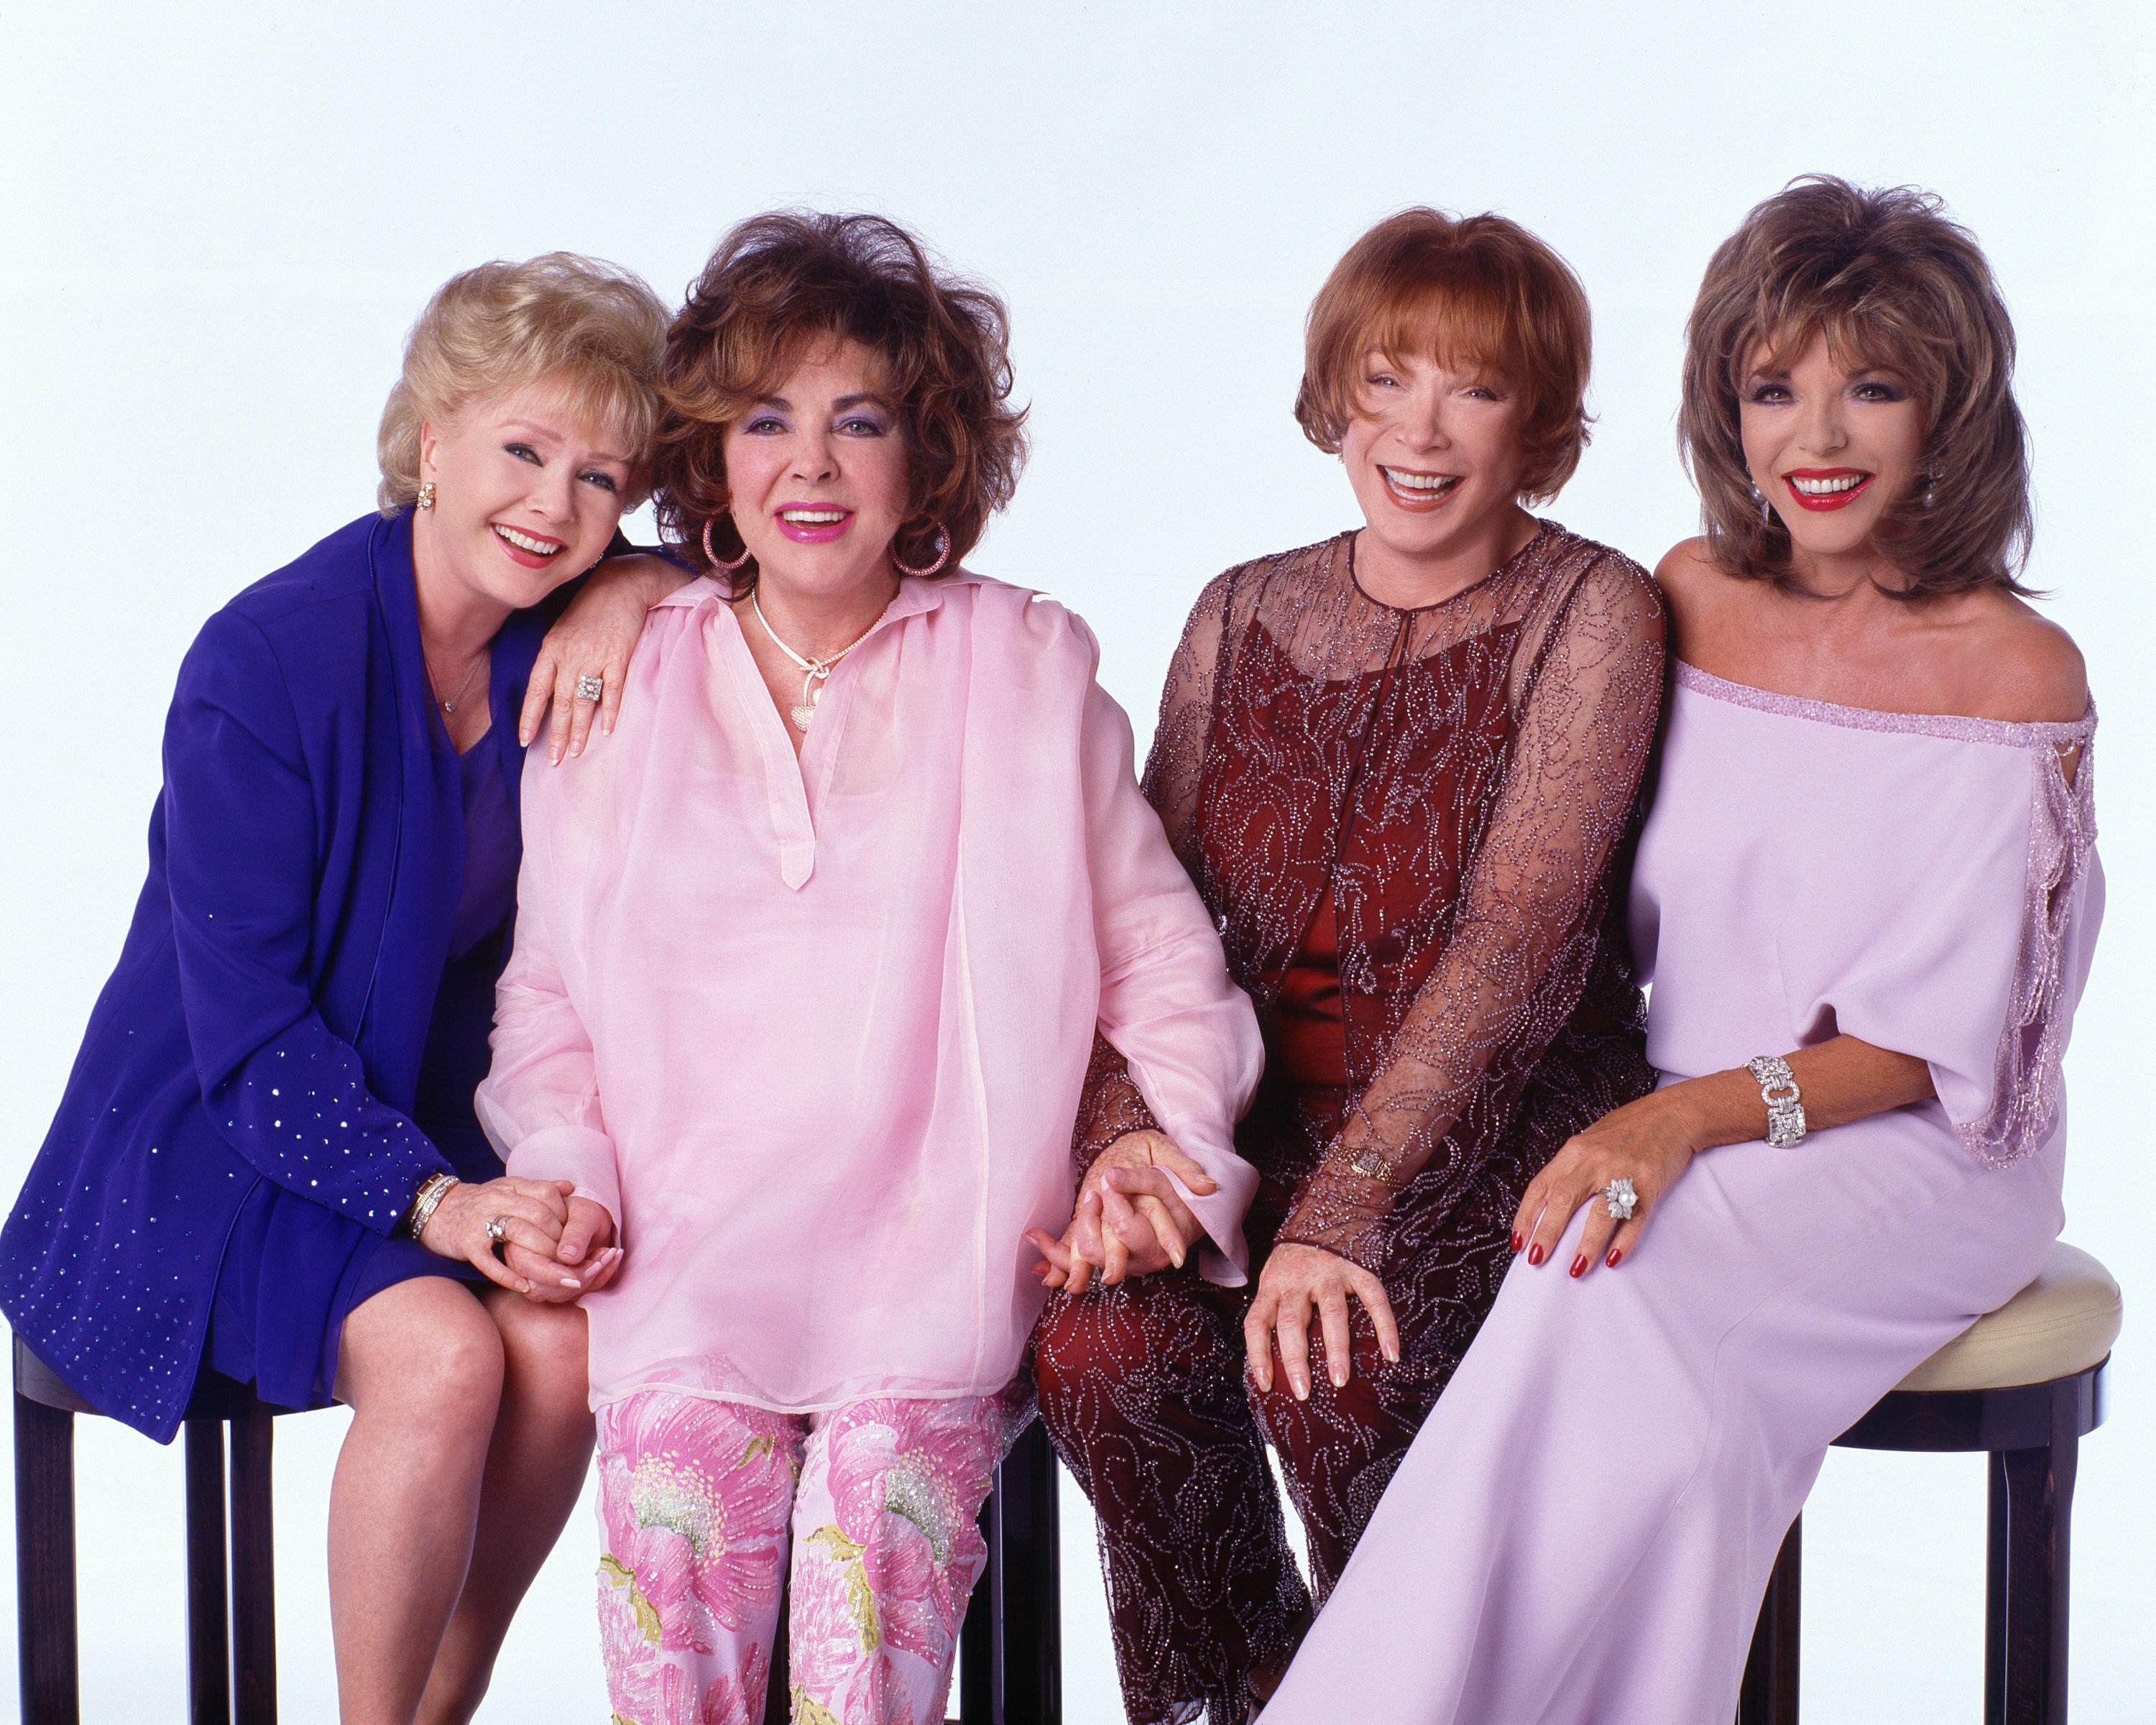 Four of HollywoodÕs most legendary stars - Shirley MacLaine, Debbie Reynolds, Joan Collins and Elizabeth Taylor - will star in "These Old Broads," a two-hour comedy written by Carrie Fisher ("Postcards From the Edge") and Elaine Pope ("Seinfeld"). The film will air during the 2000-01 season on the Walt Disney Television via Getty Images Television Network.DEBBIE REYNOLDS, ELIZABETH TAYLOR, SHIRLEY MACLAINE, JOAN COLLINS